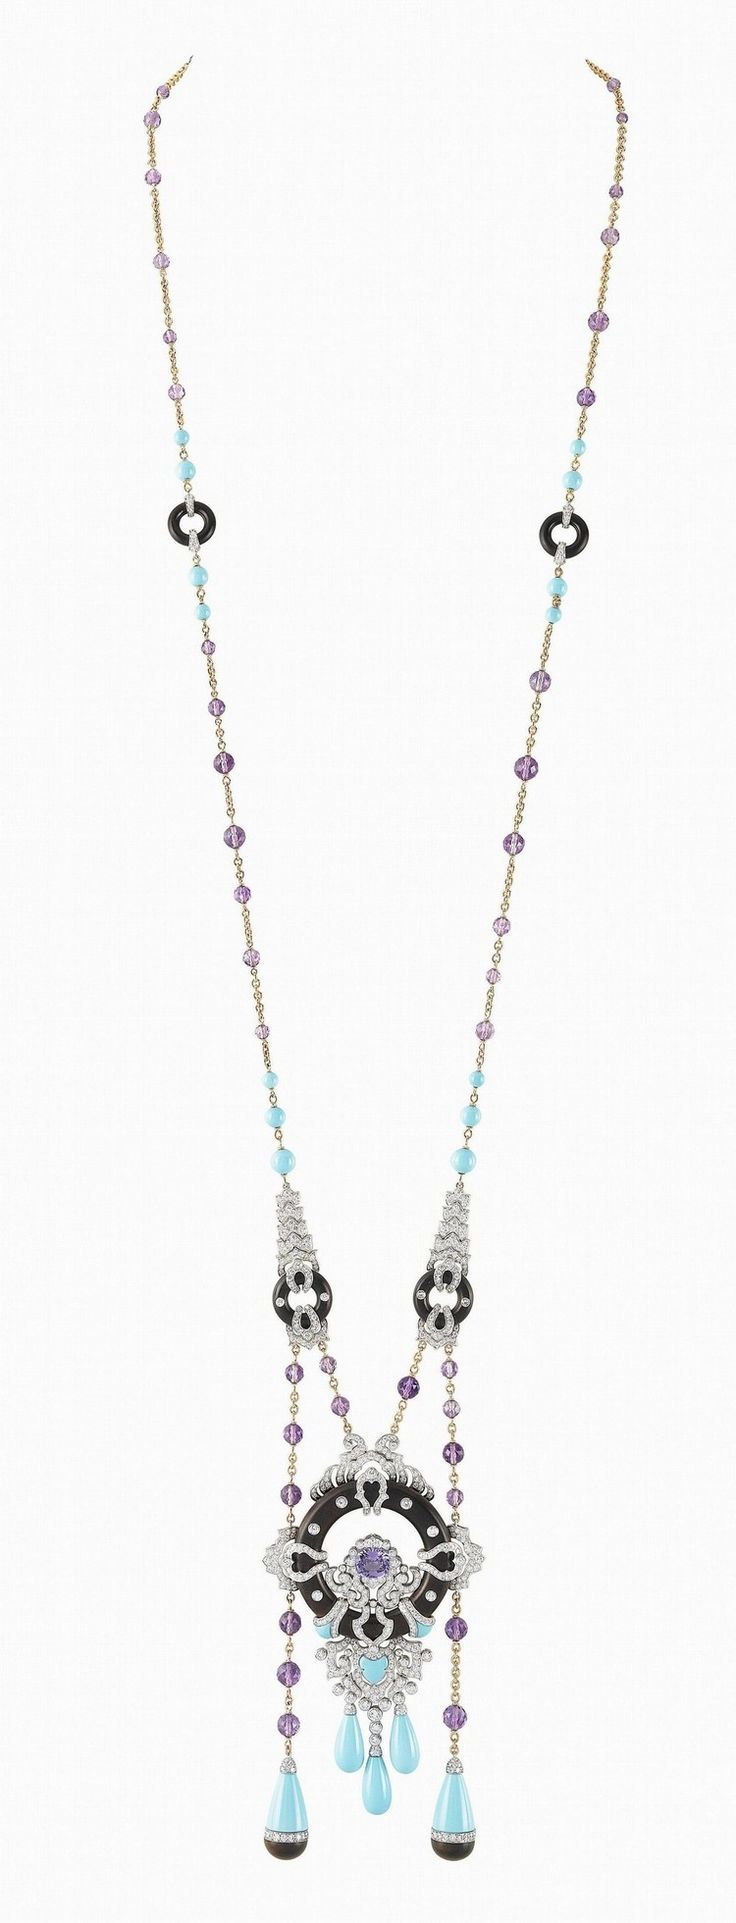 A diamond, amethyst, onyx, turquoise, and platinum necklace, by Van Cleef & Arpe...